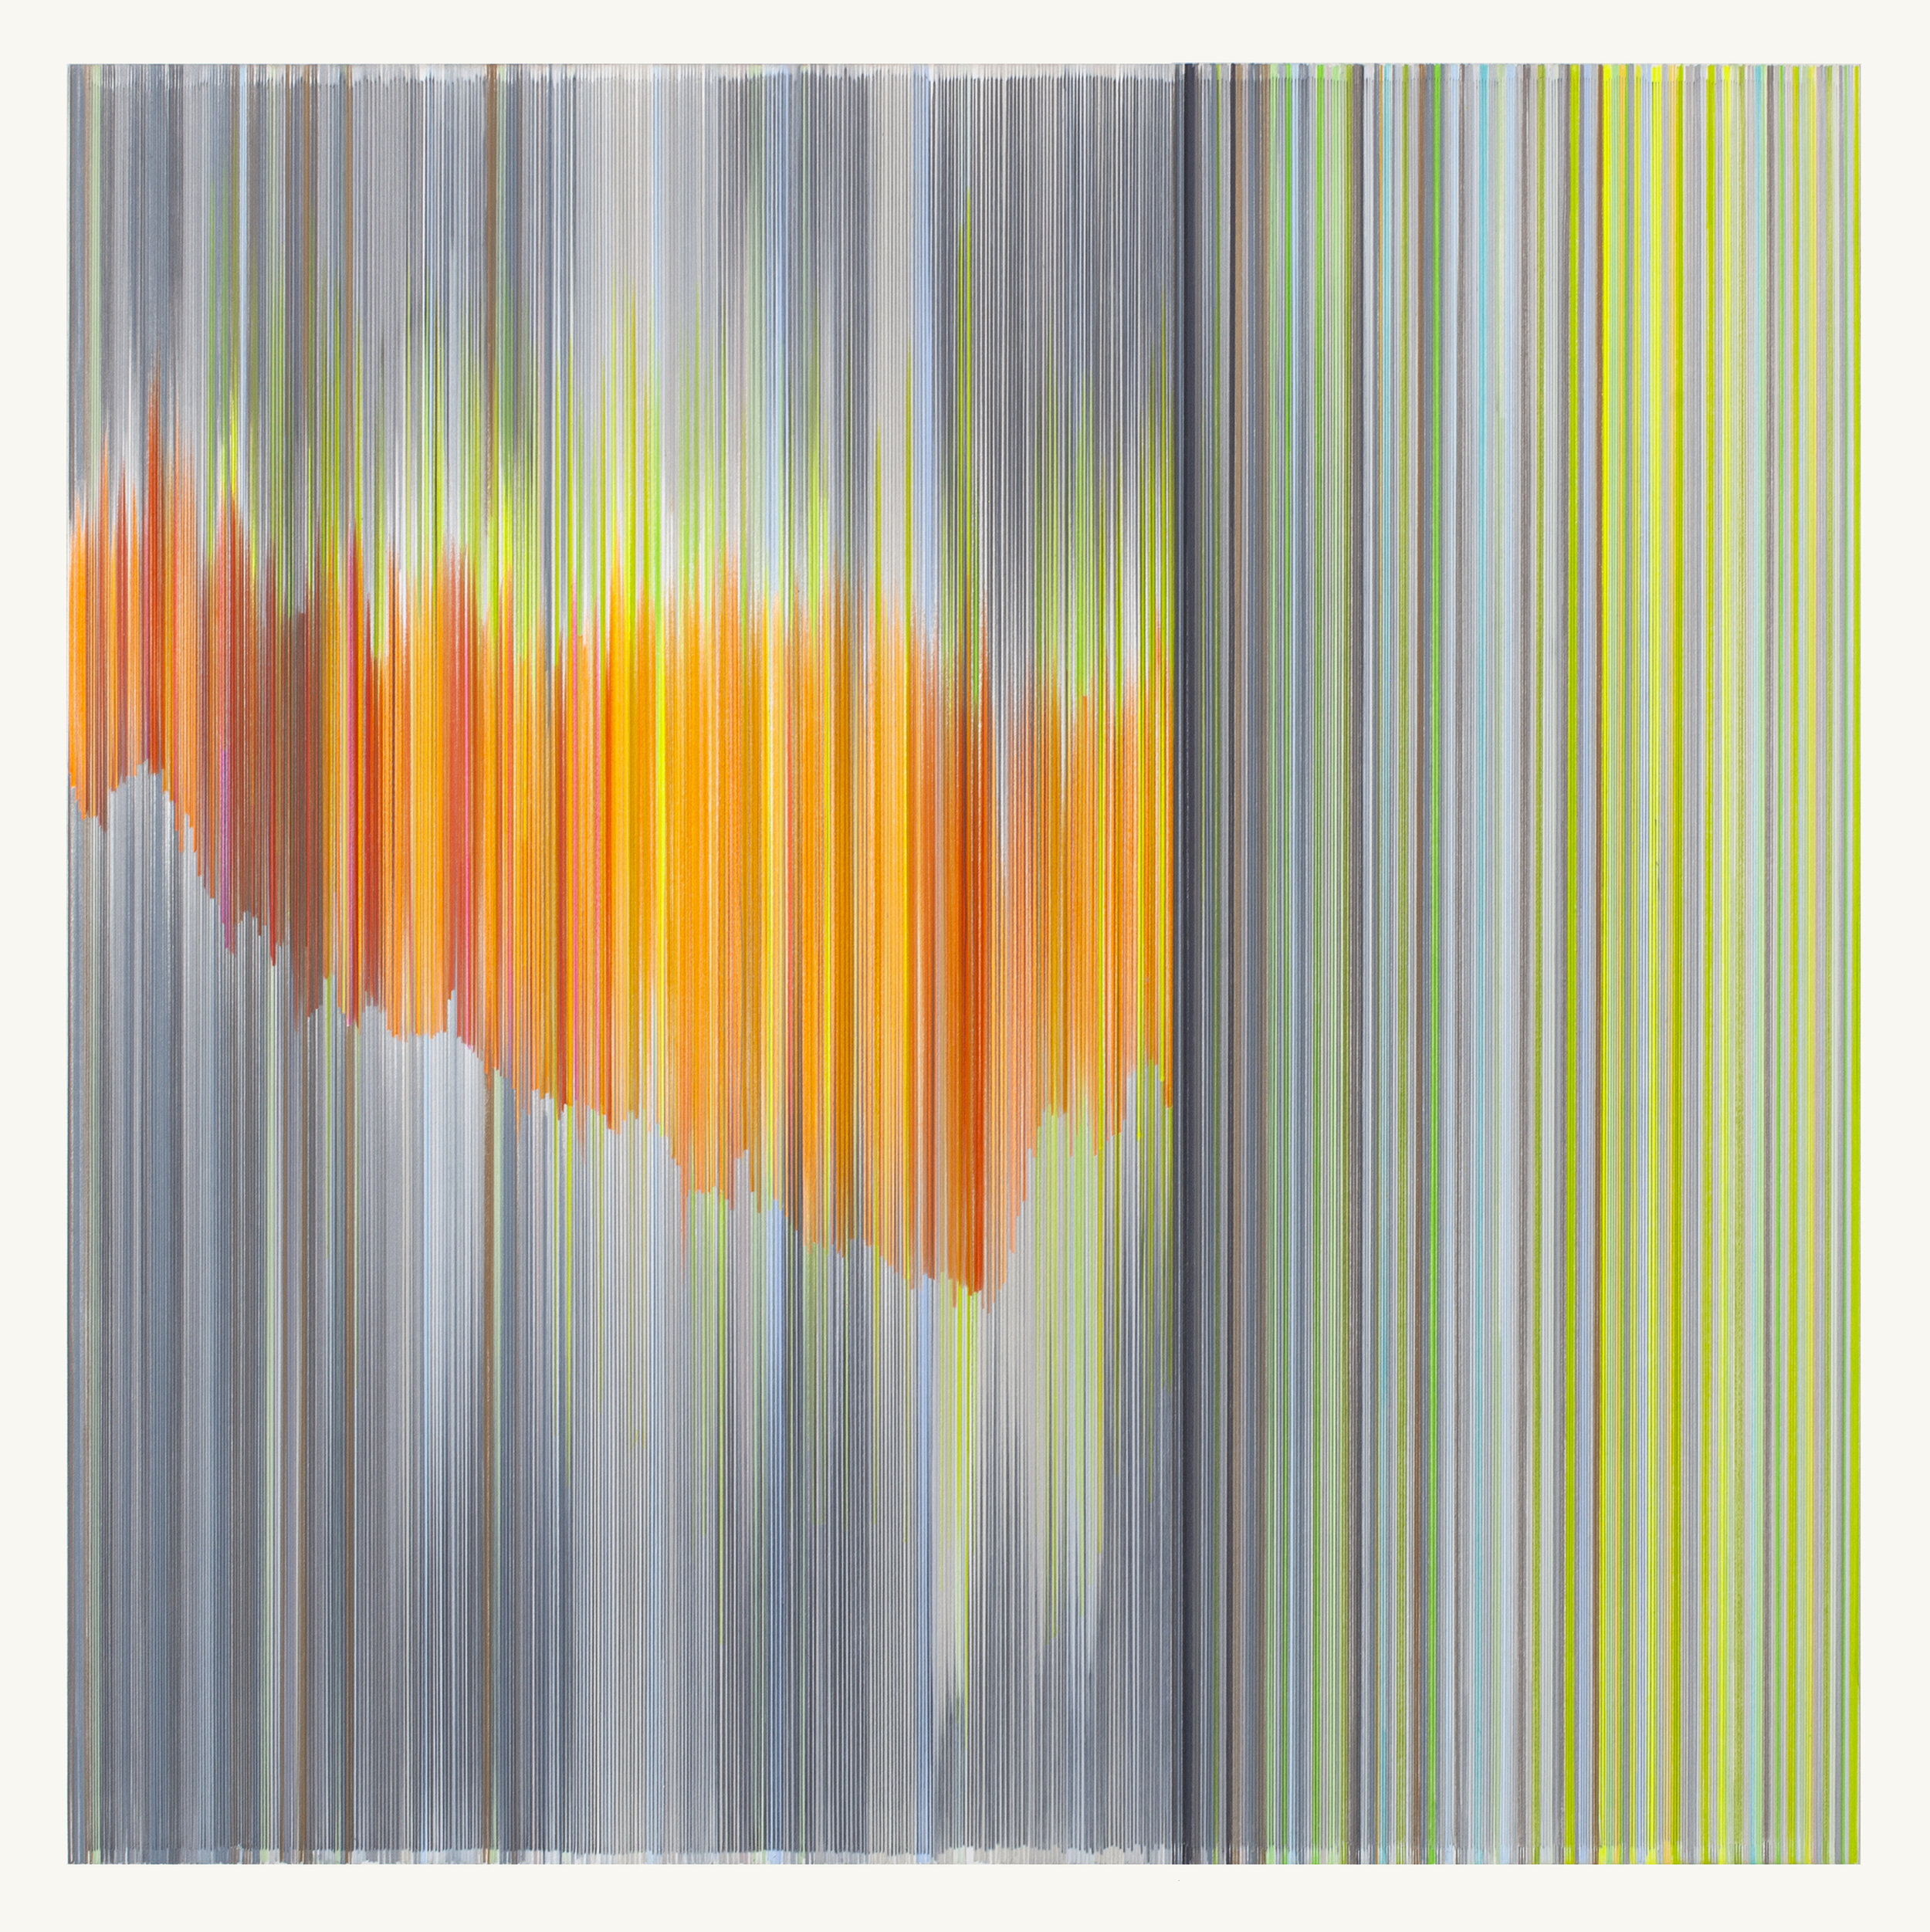    flash: across   2020 graphite and colored pencil on mat board 30 x 30 inches 